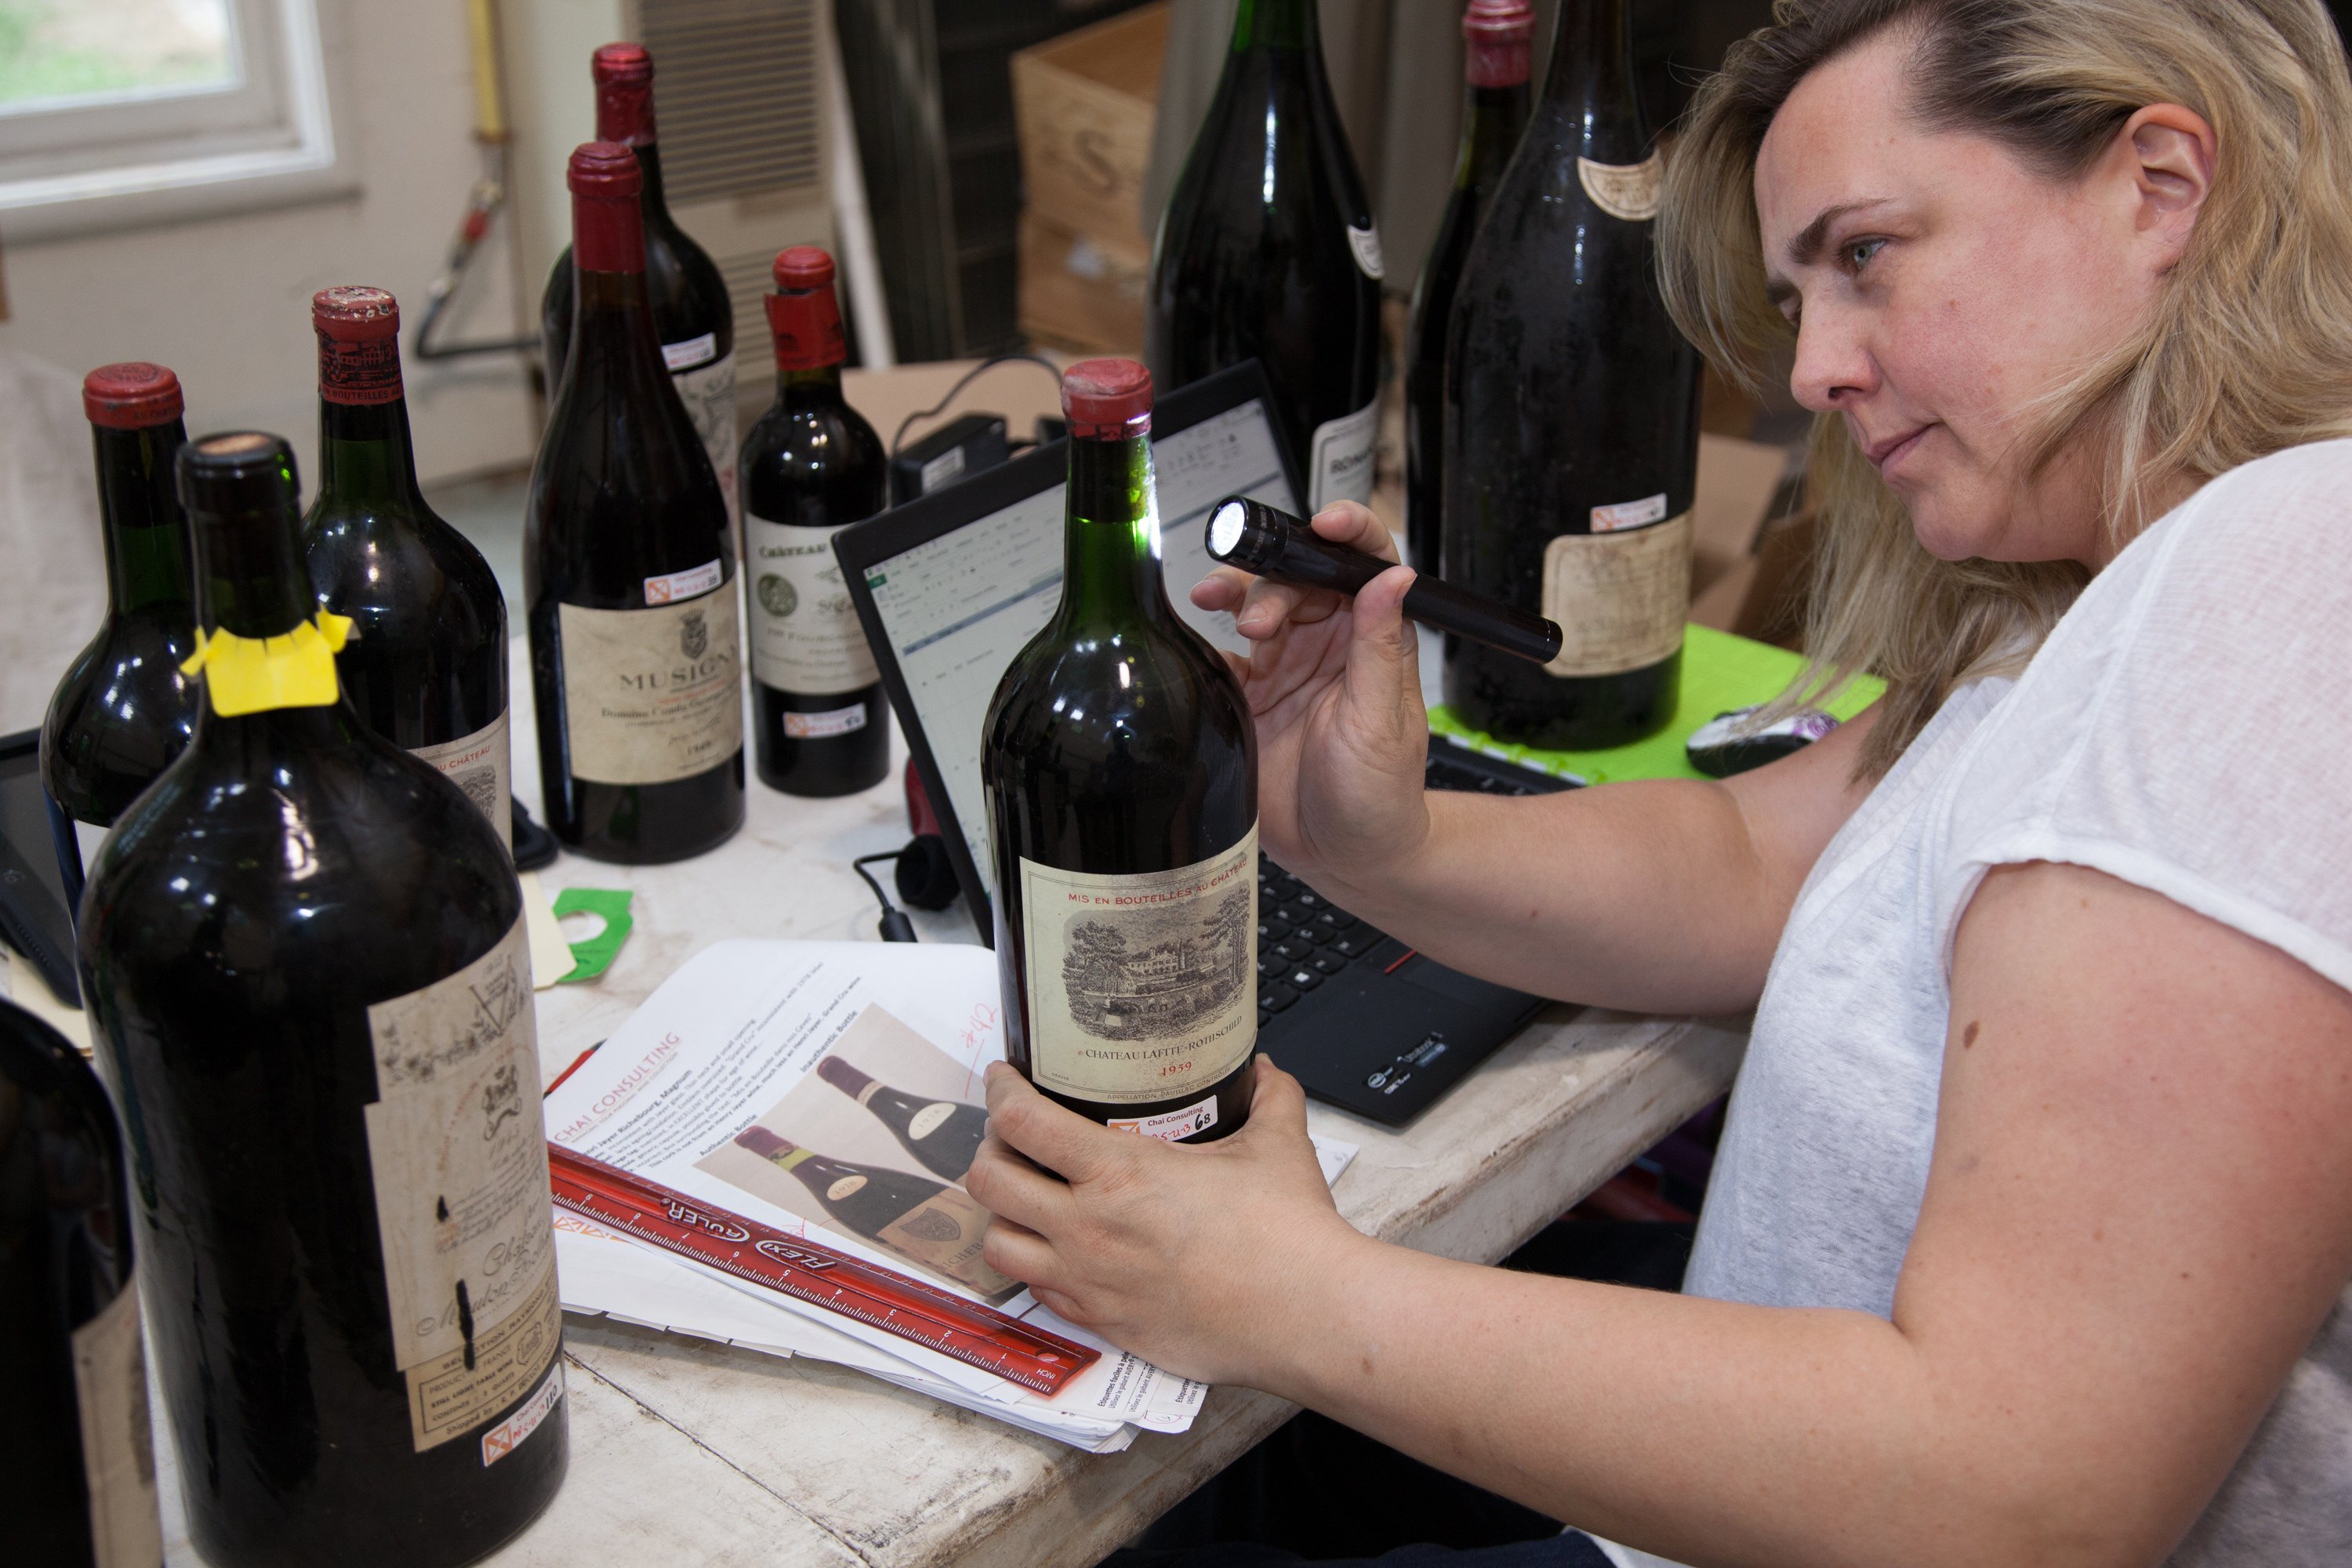 Maureen Downey looking a bottles of wine. Downey is a self-educated wine expert and fraud detector. Photo: Maureen Downey